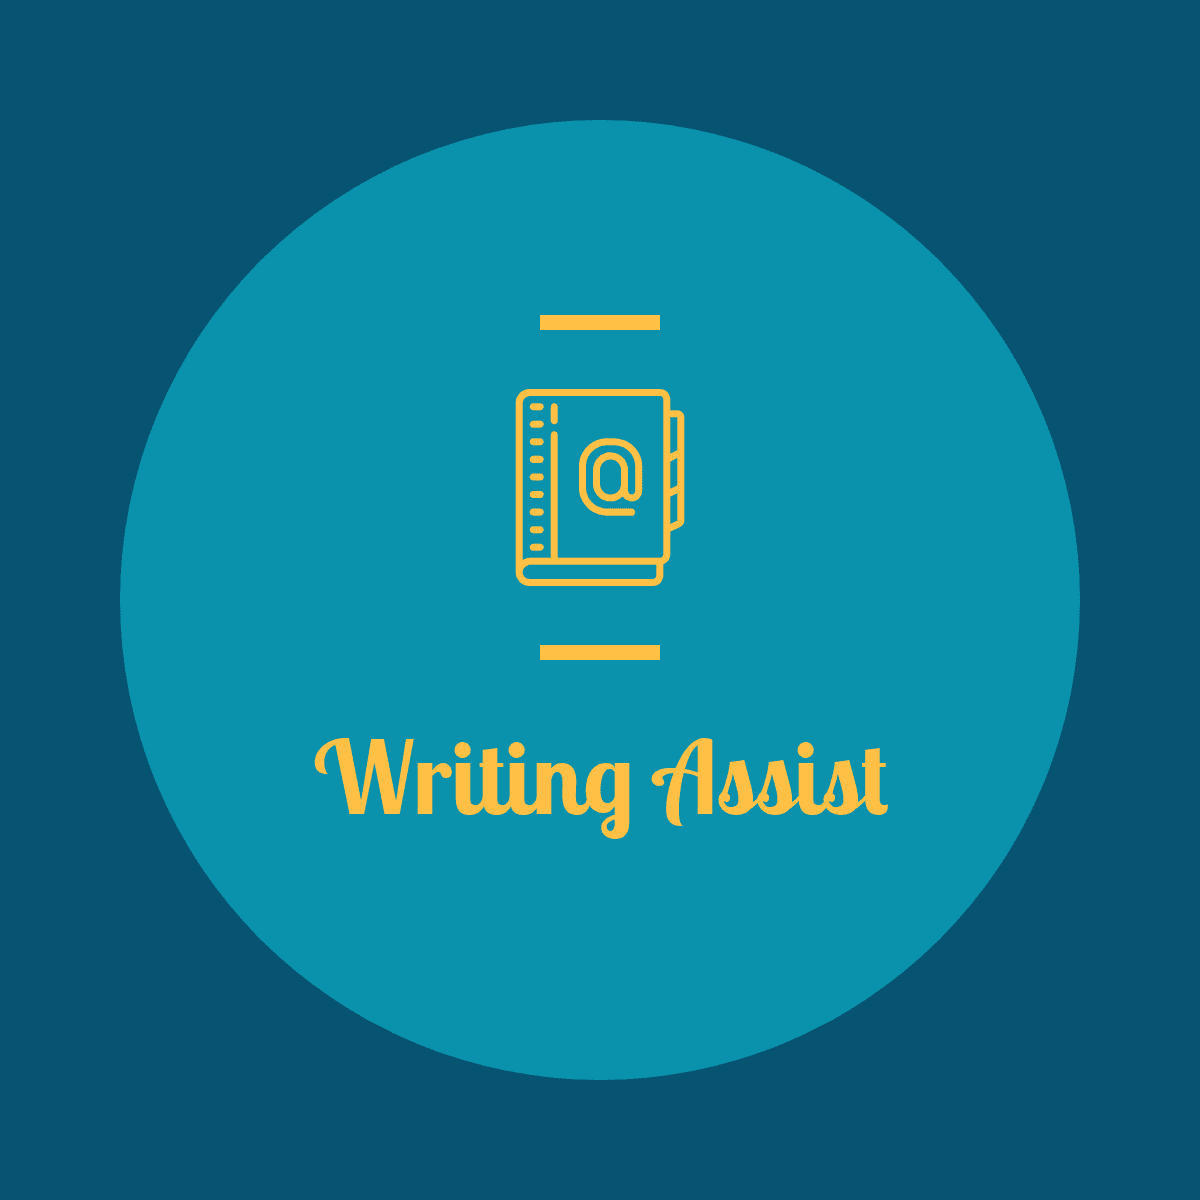 The writing assist to help students with assignments and essays